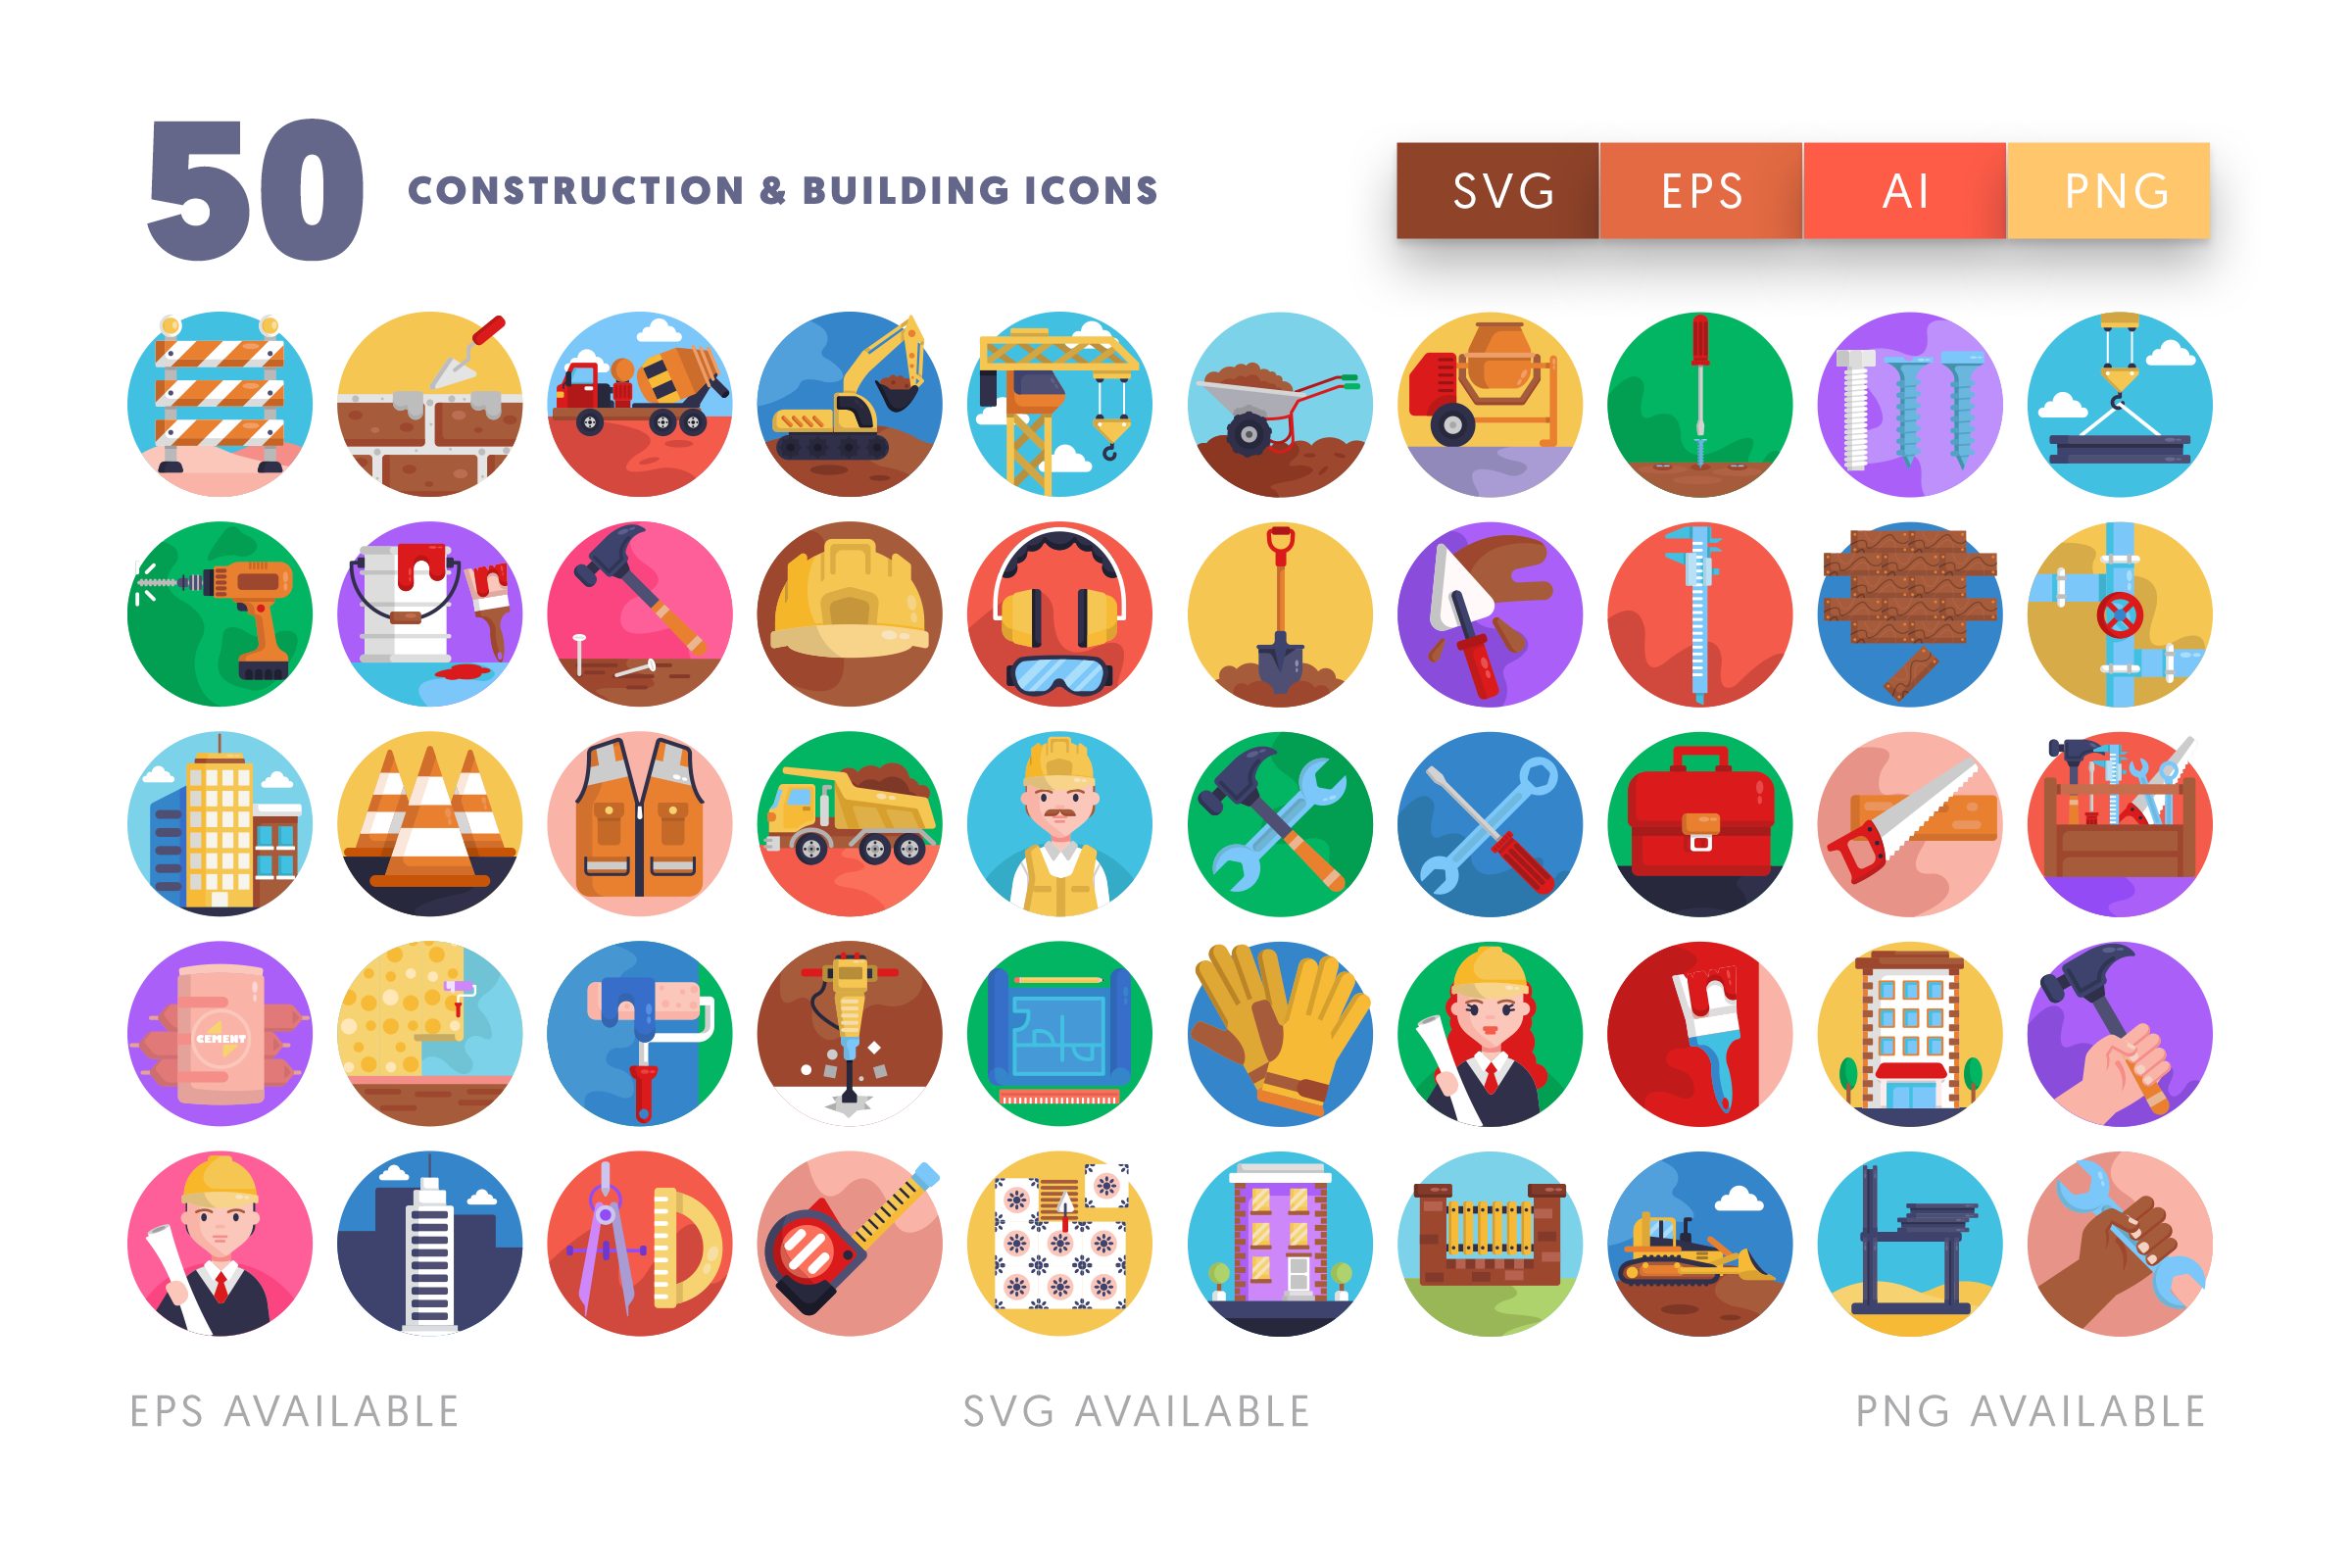 Construction & Building icons png/svg/eps